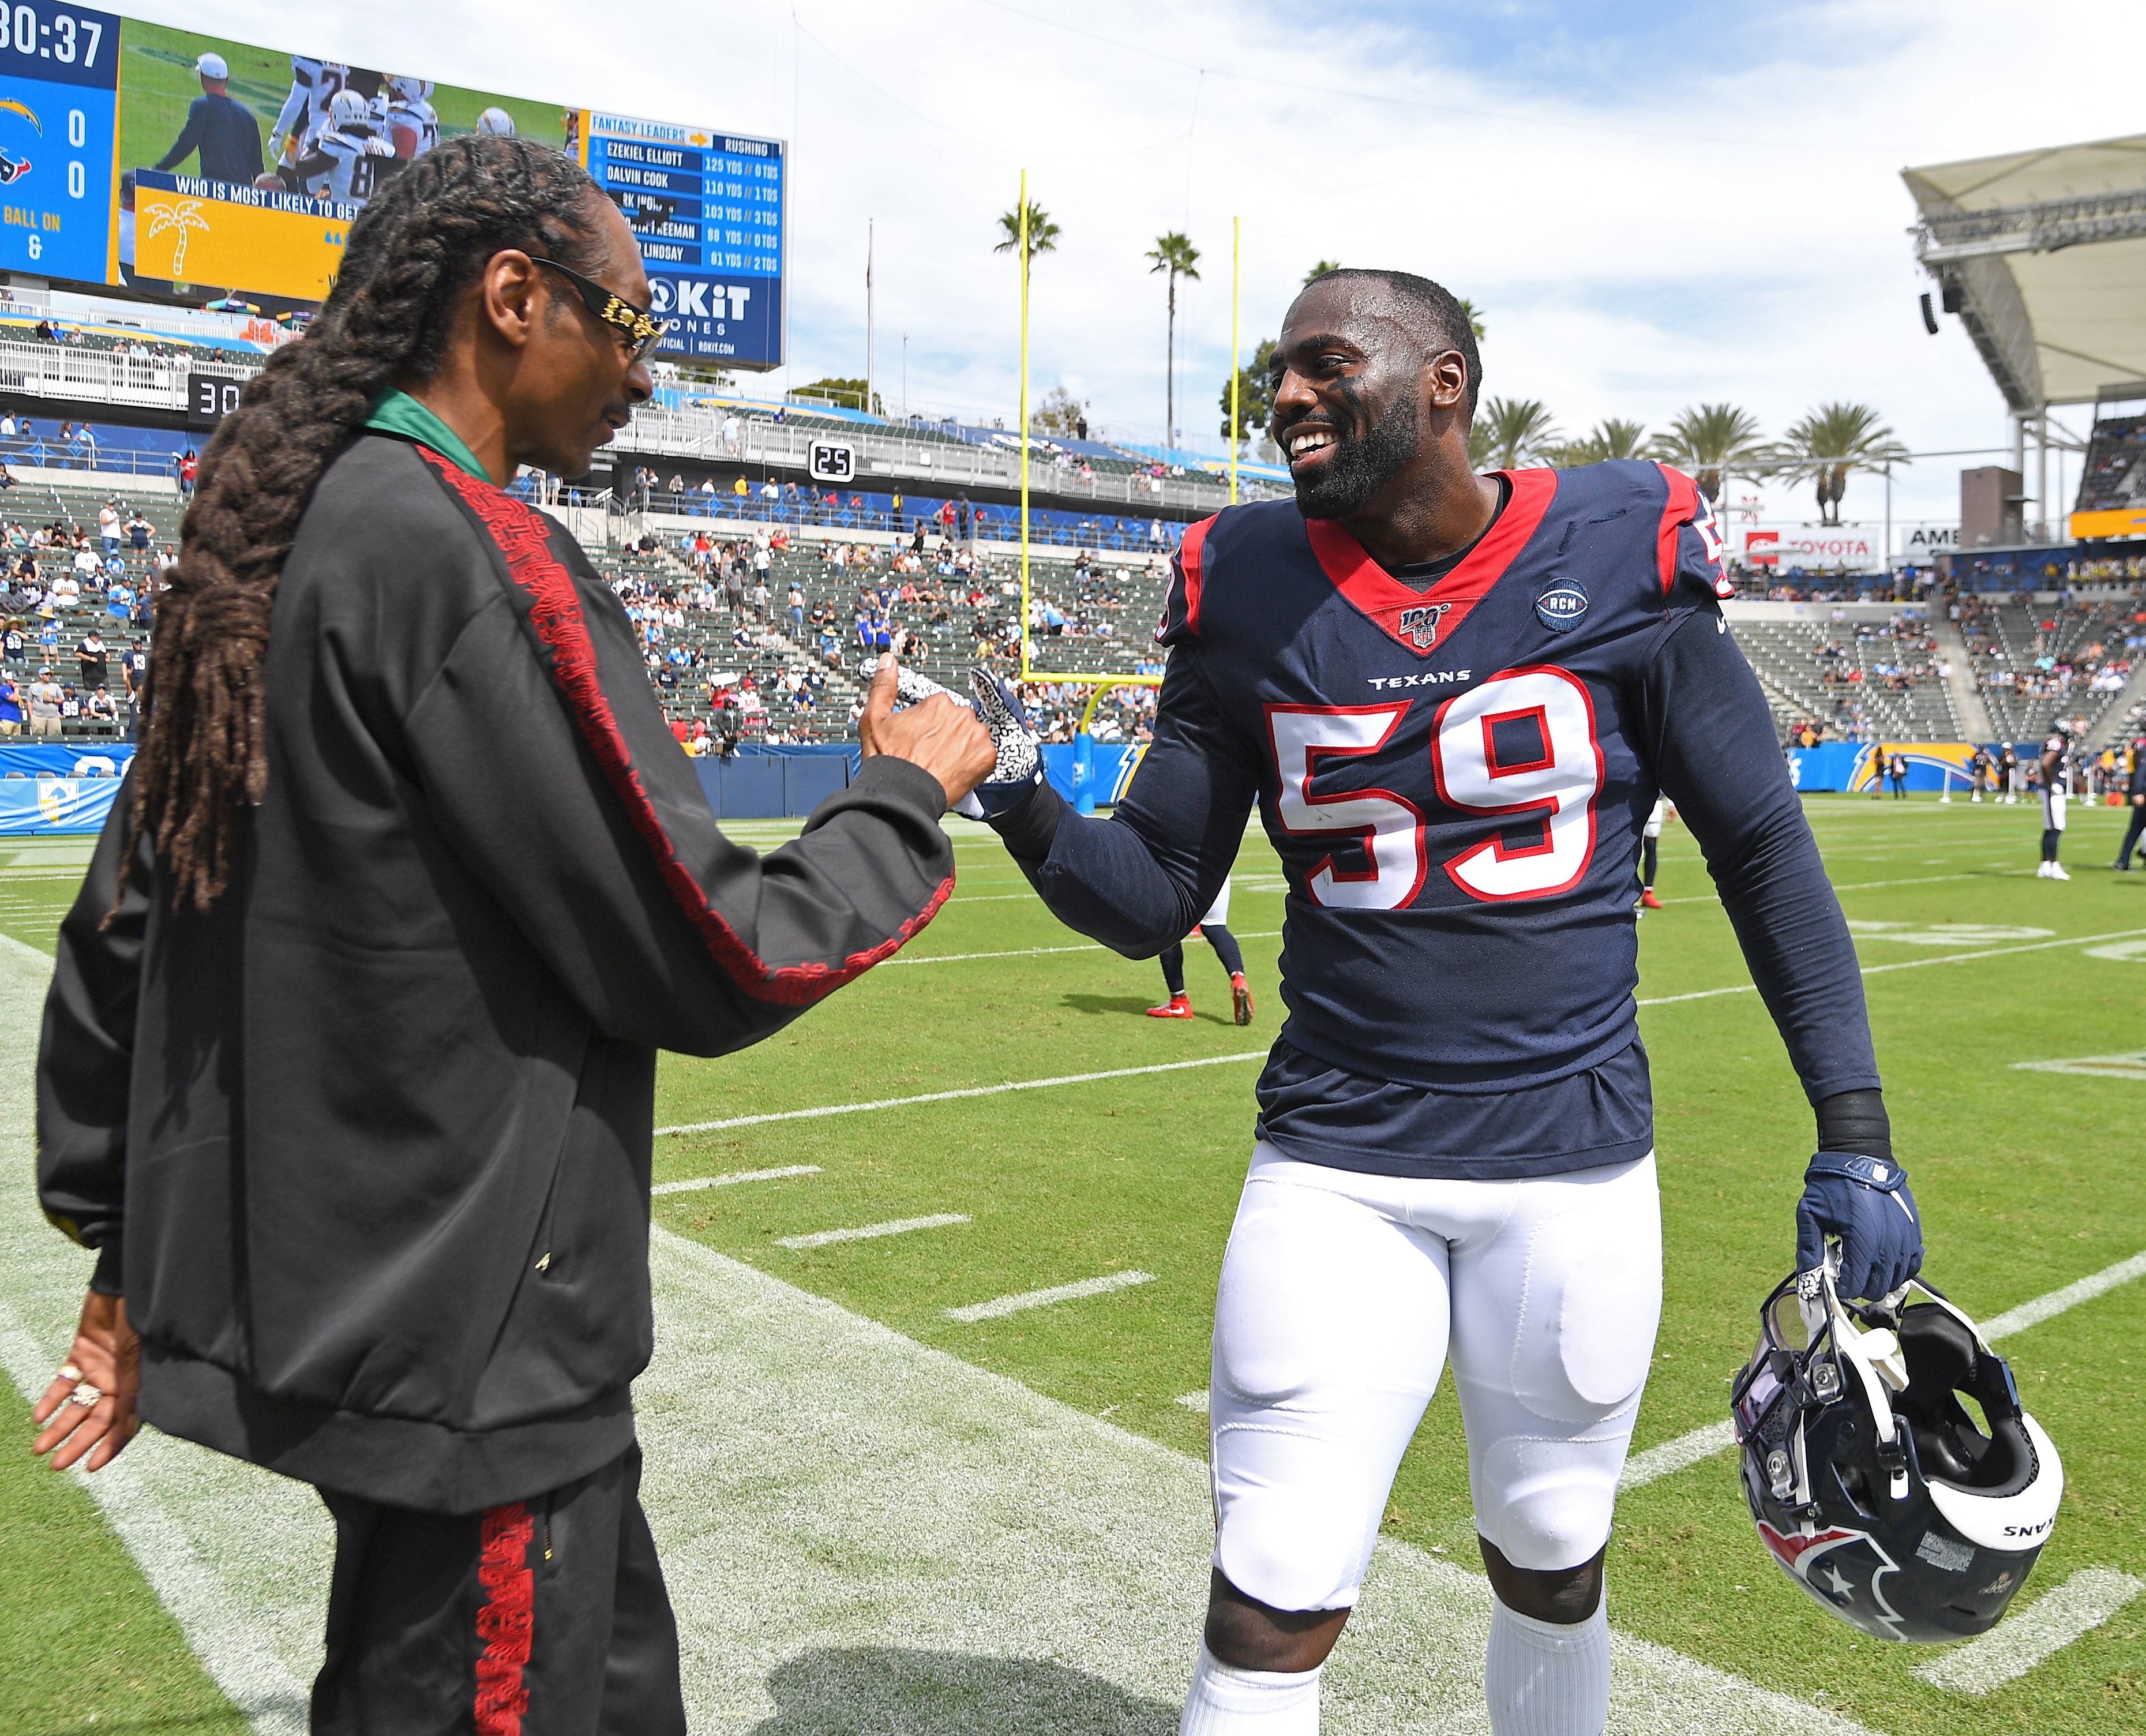 Houston Texans vLos Angeles Chargers